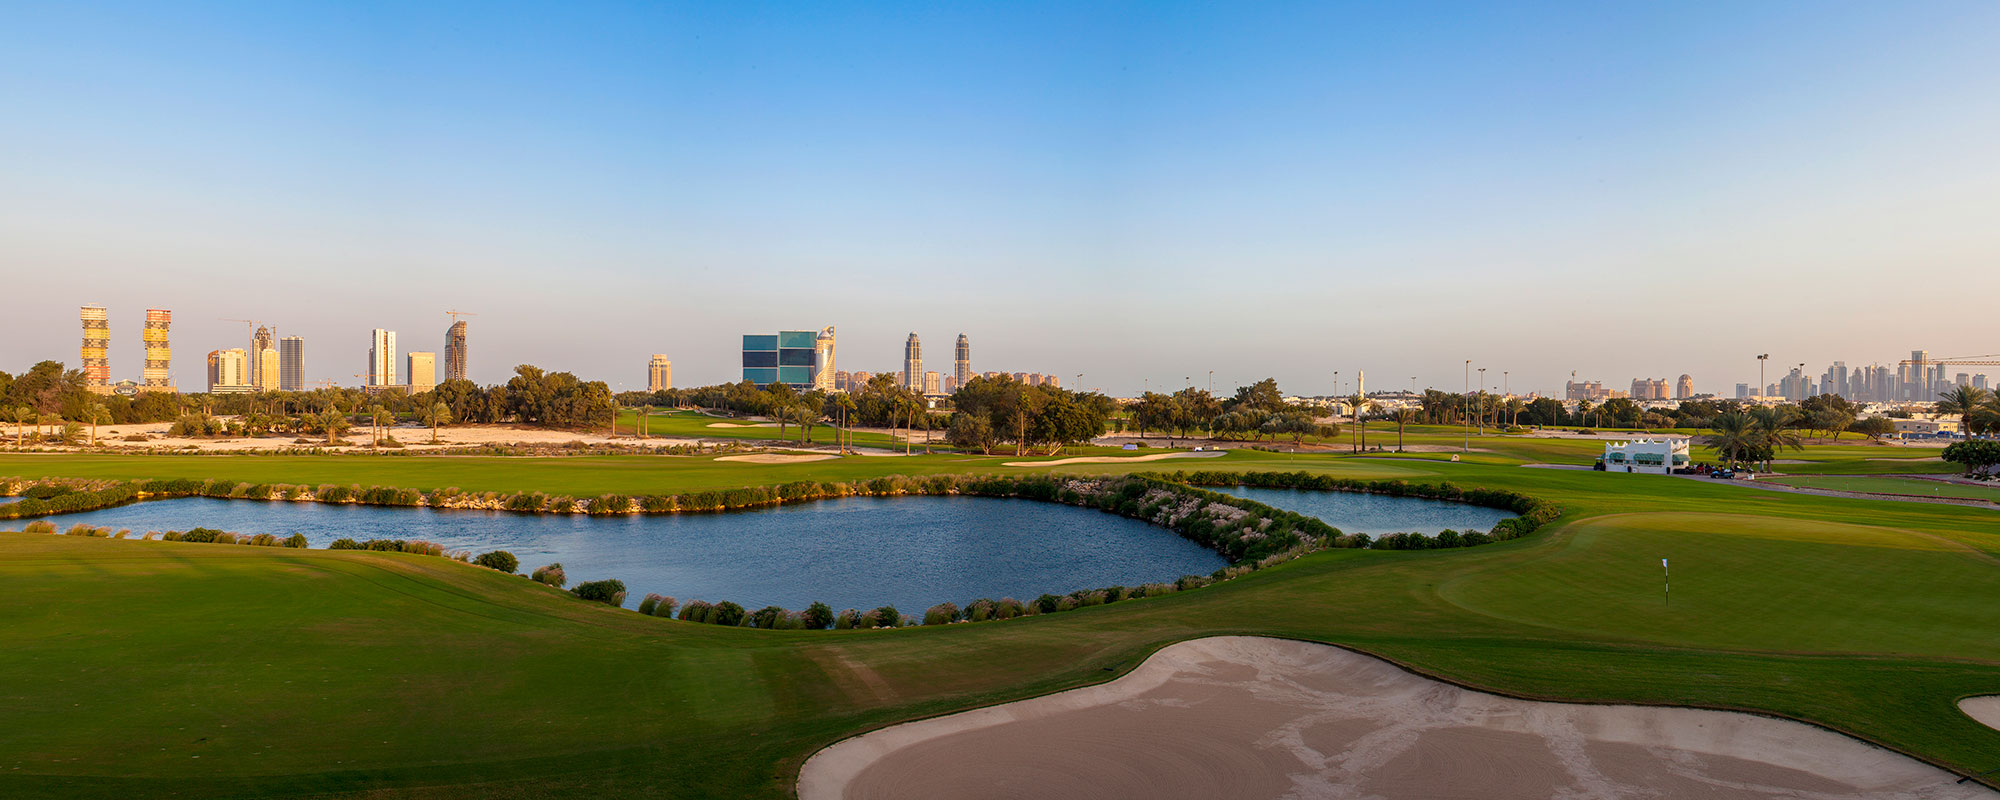 Guide to Golf in Qatar